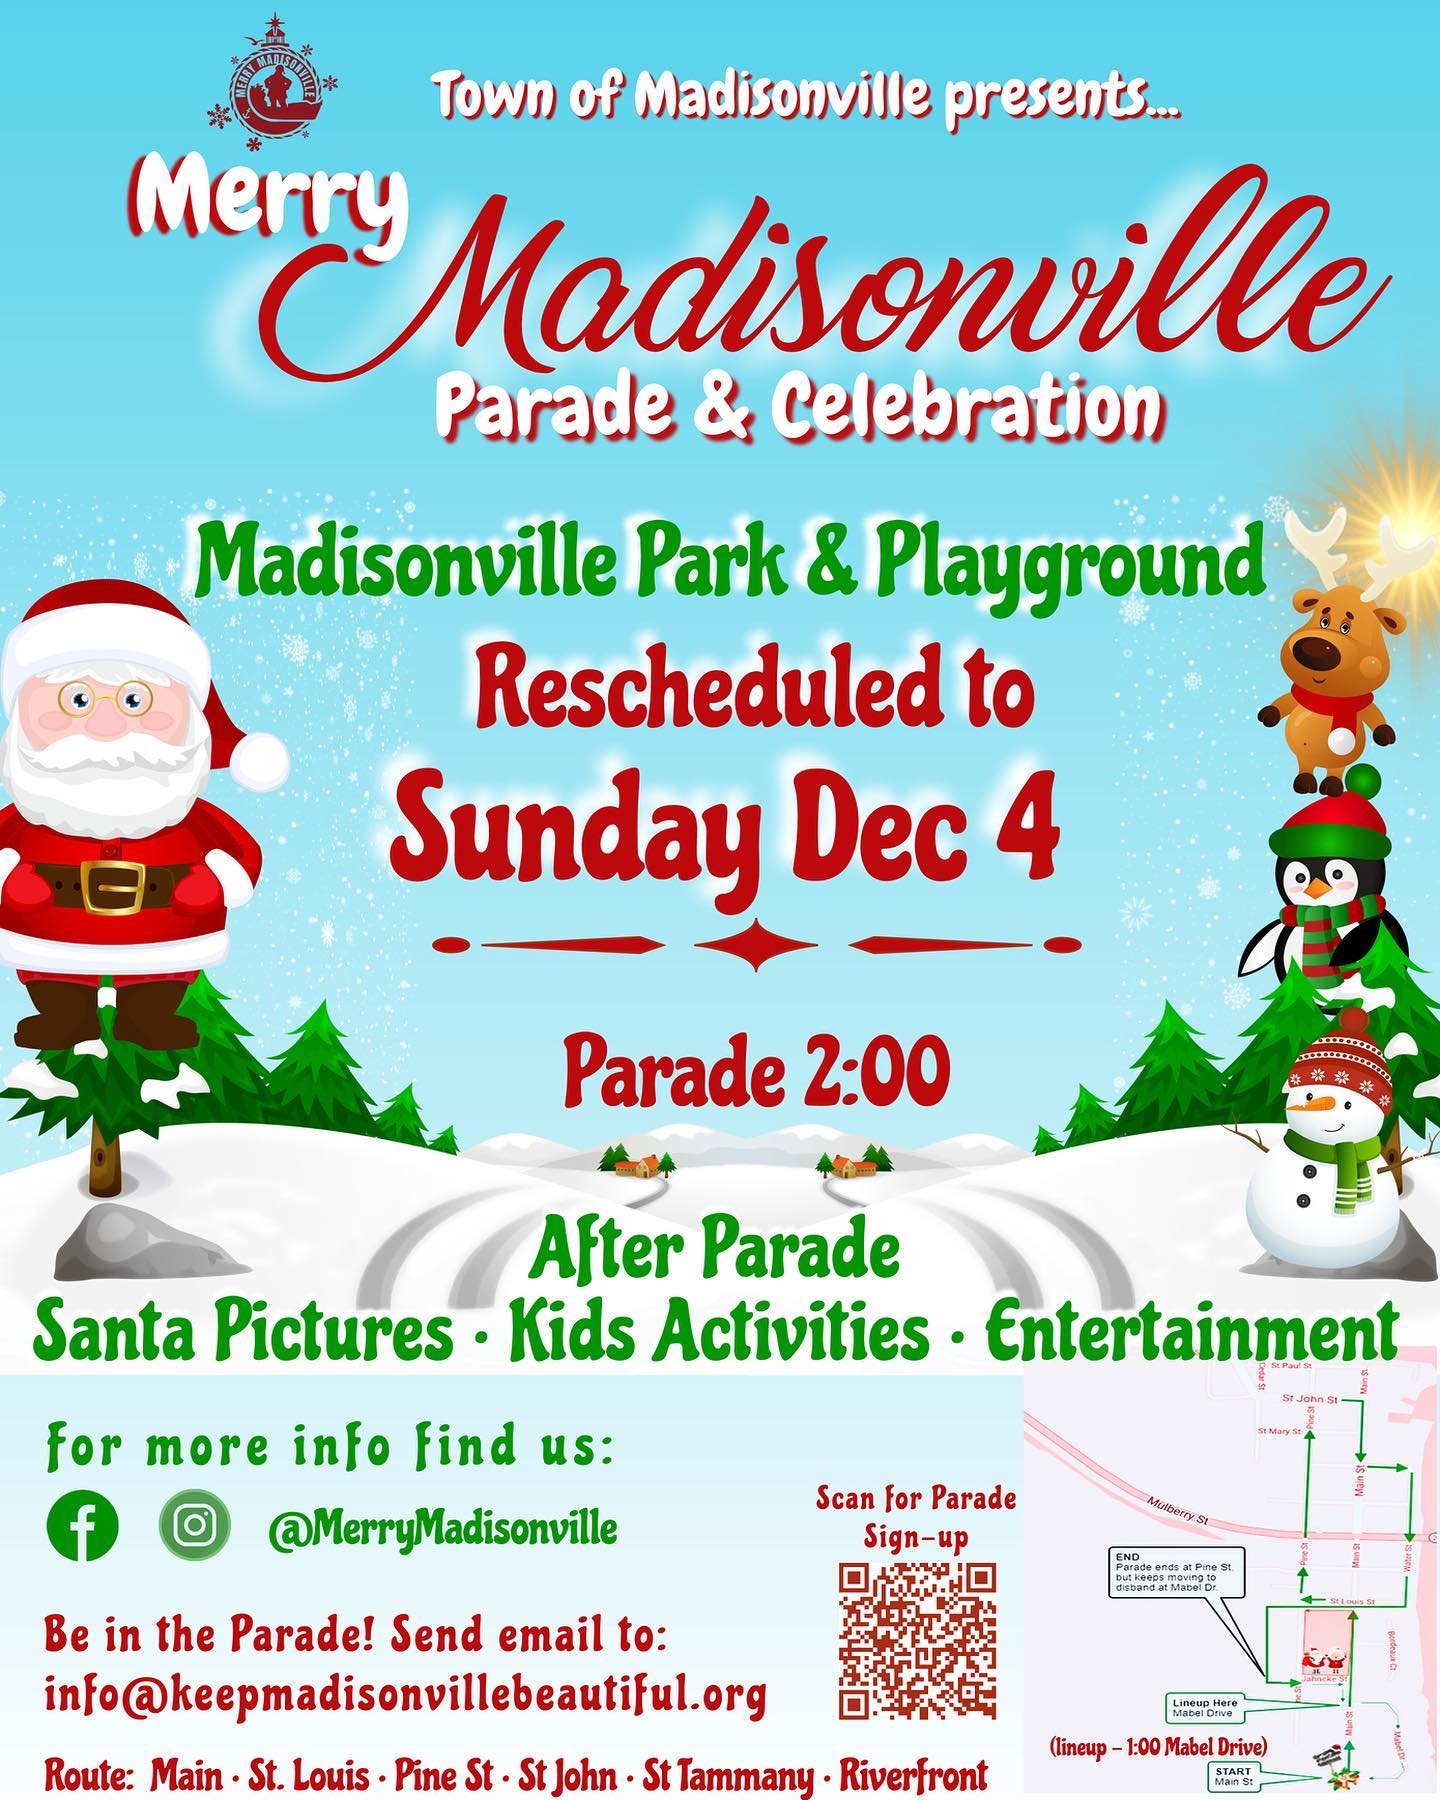 Merry Madisonville {Including Parade}